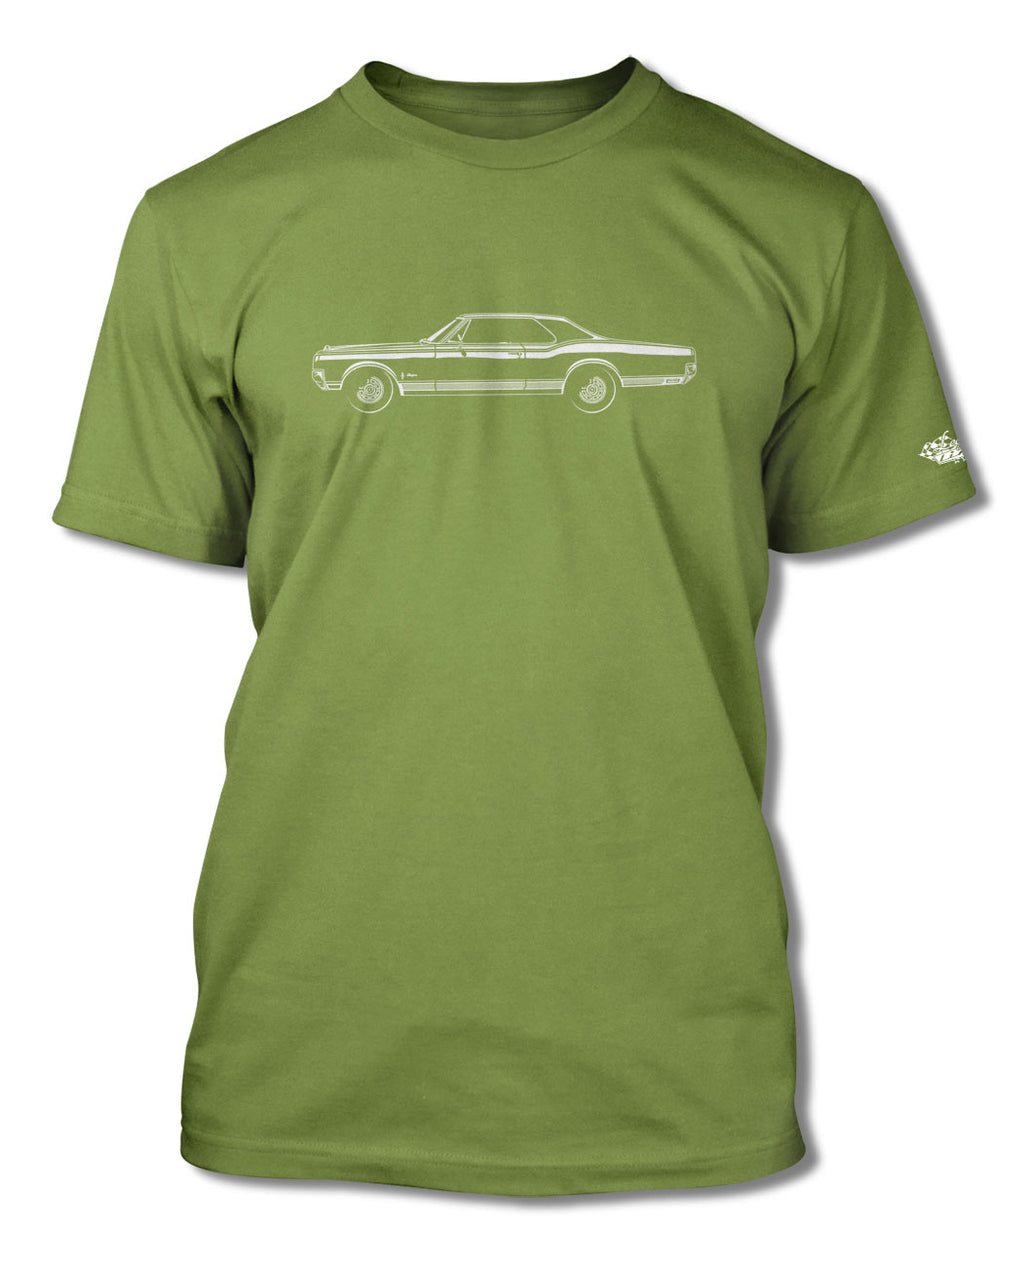 1965 Oldsmobile Starfire Coupe T-Shirt - Men - Side View